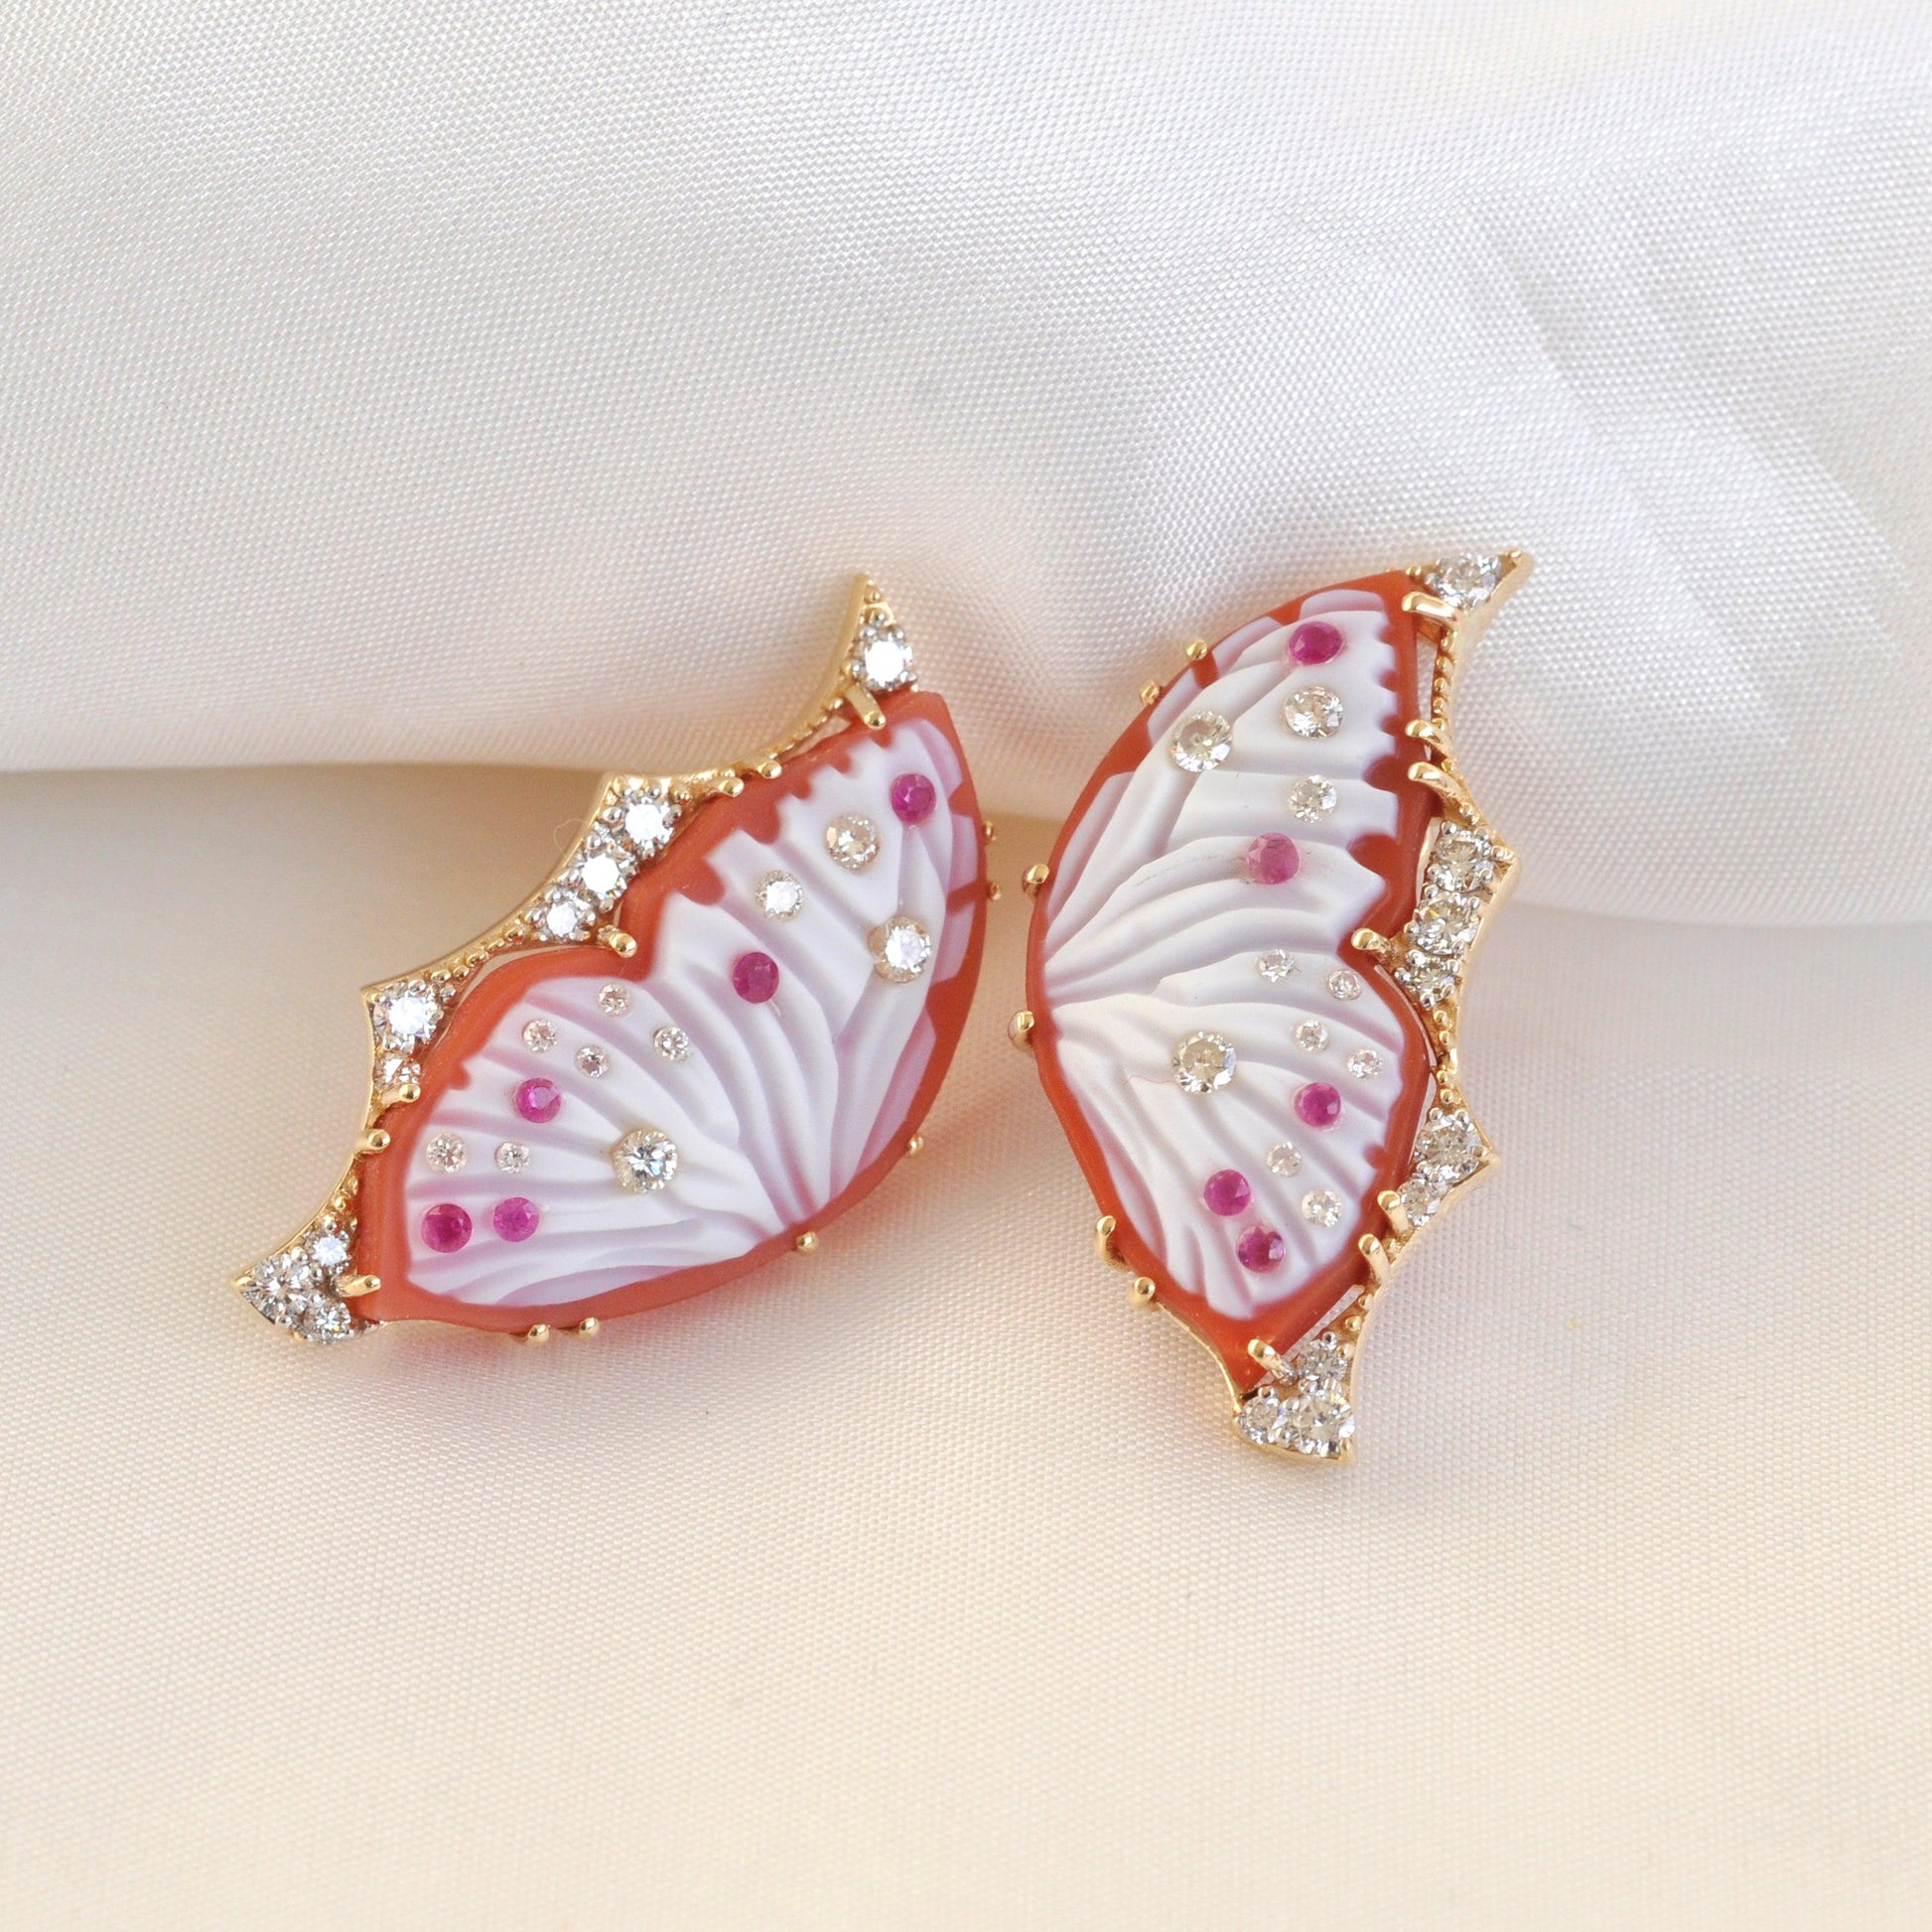 18K Gold Red Butterfly Carving Stud Earrings - Vaibhav Dhadda Jewellery